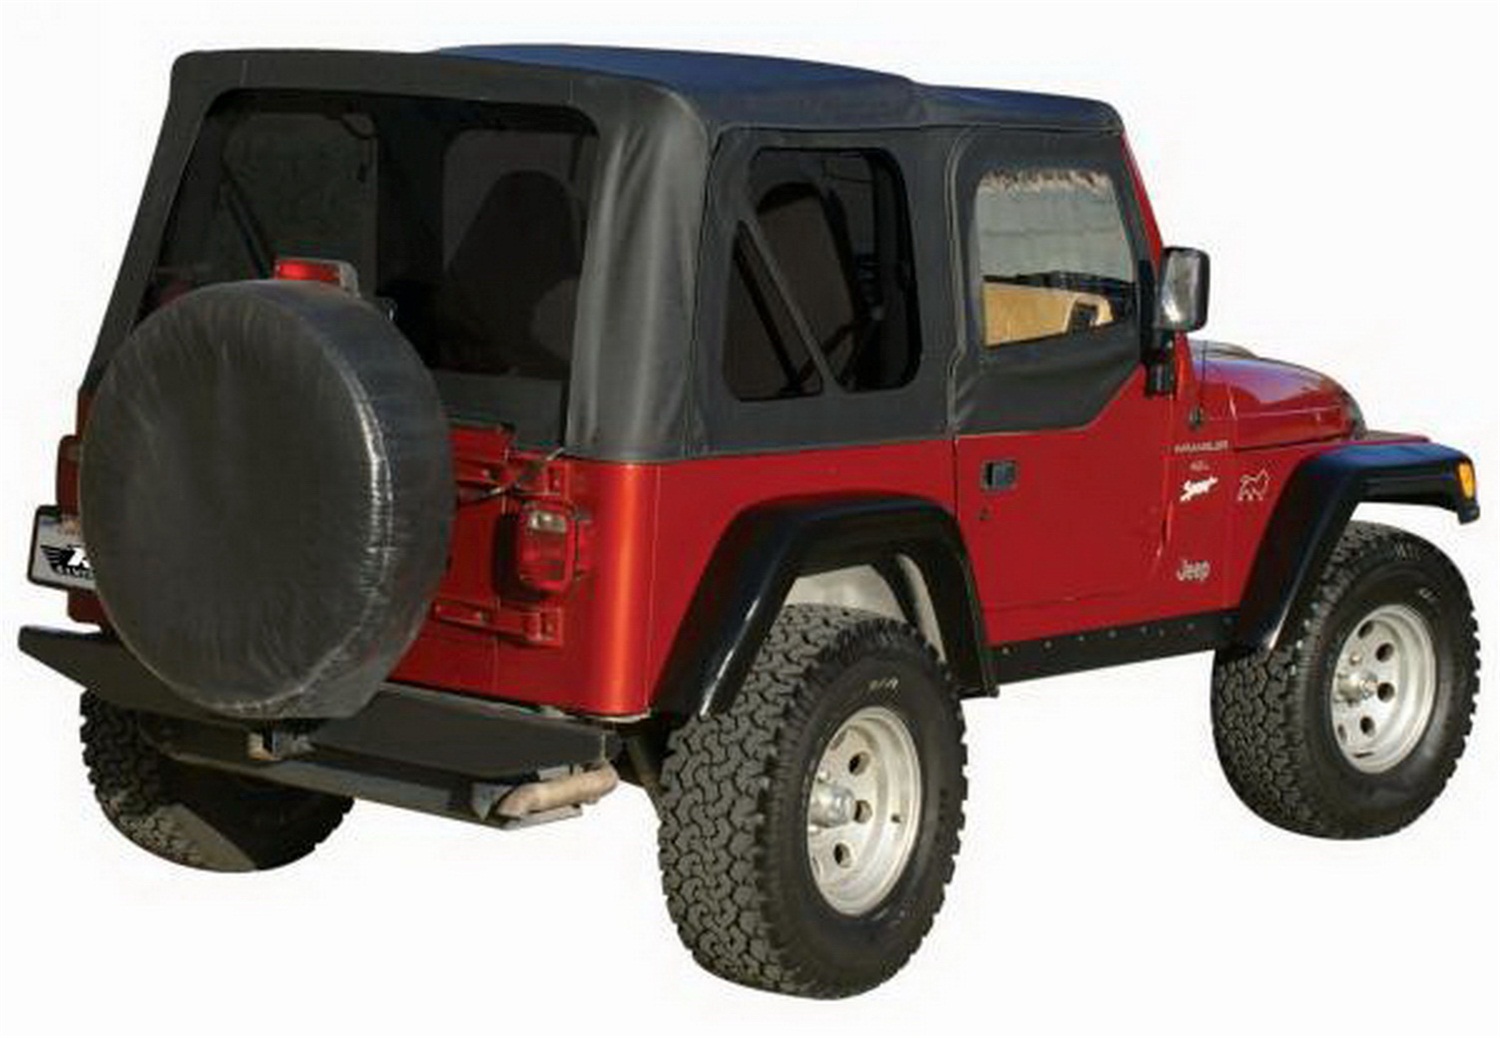 Rampage Rampage 99715 Factory Replacement Soft Top Fits 97-06 Wrangler (TJ)